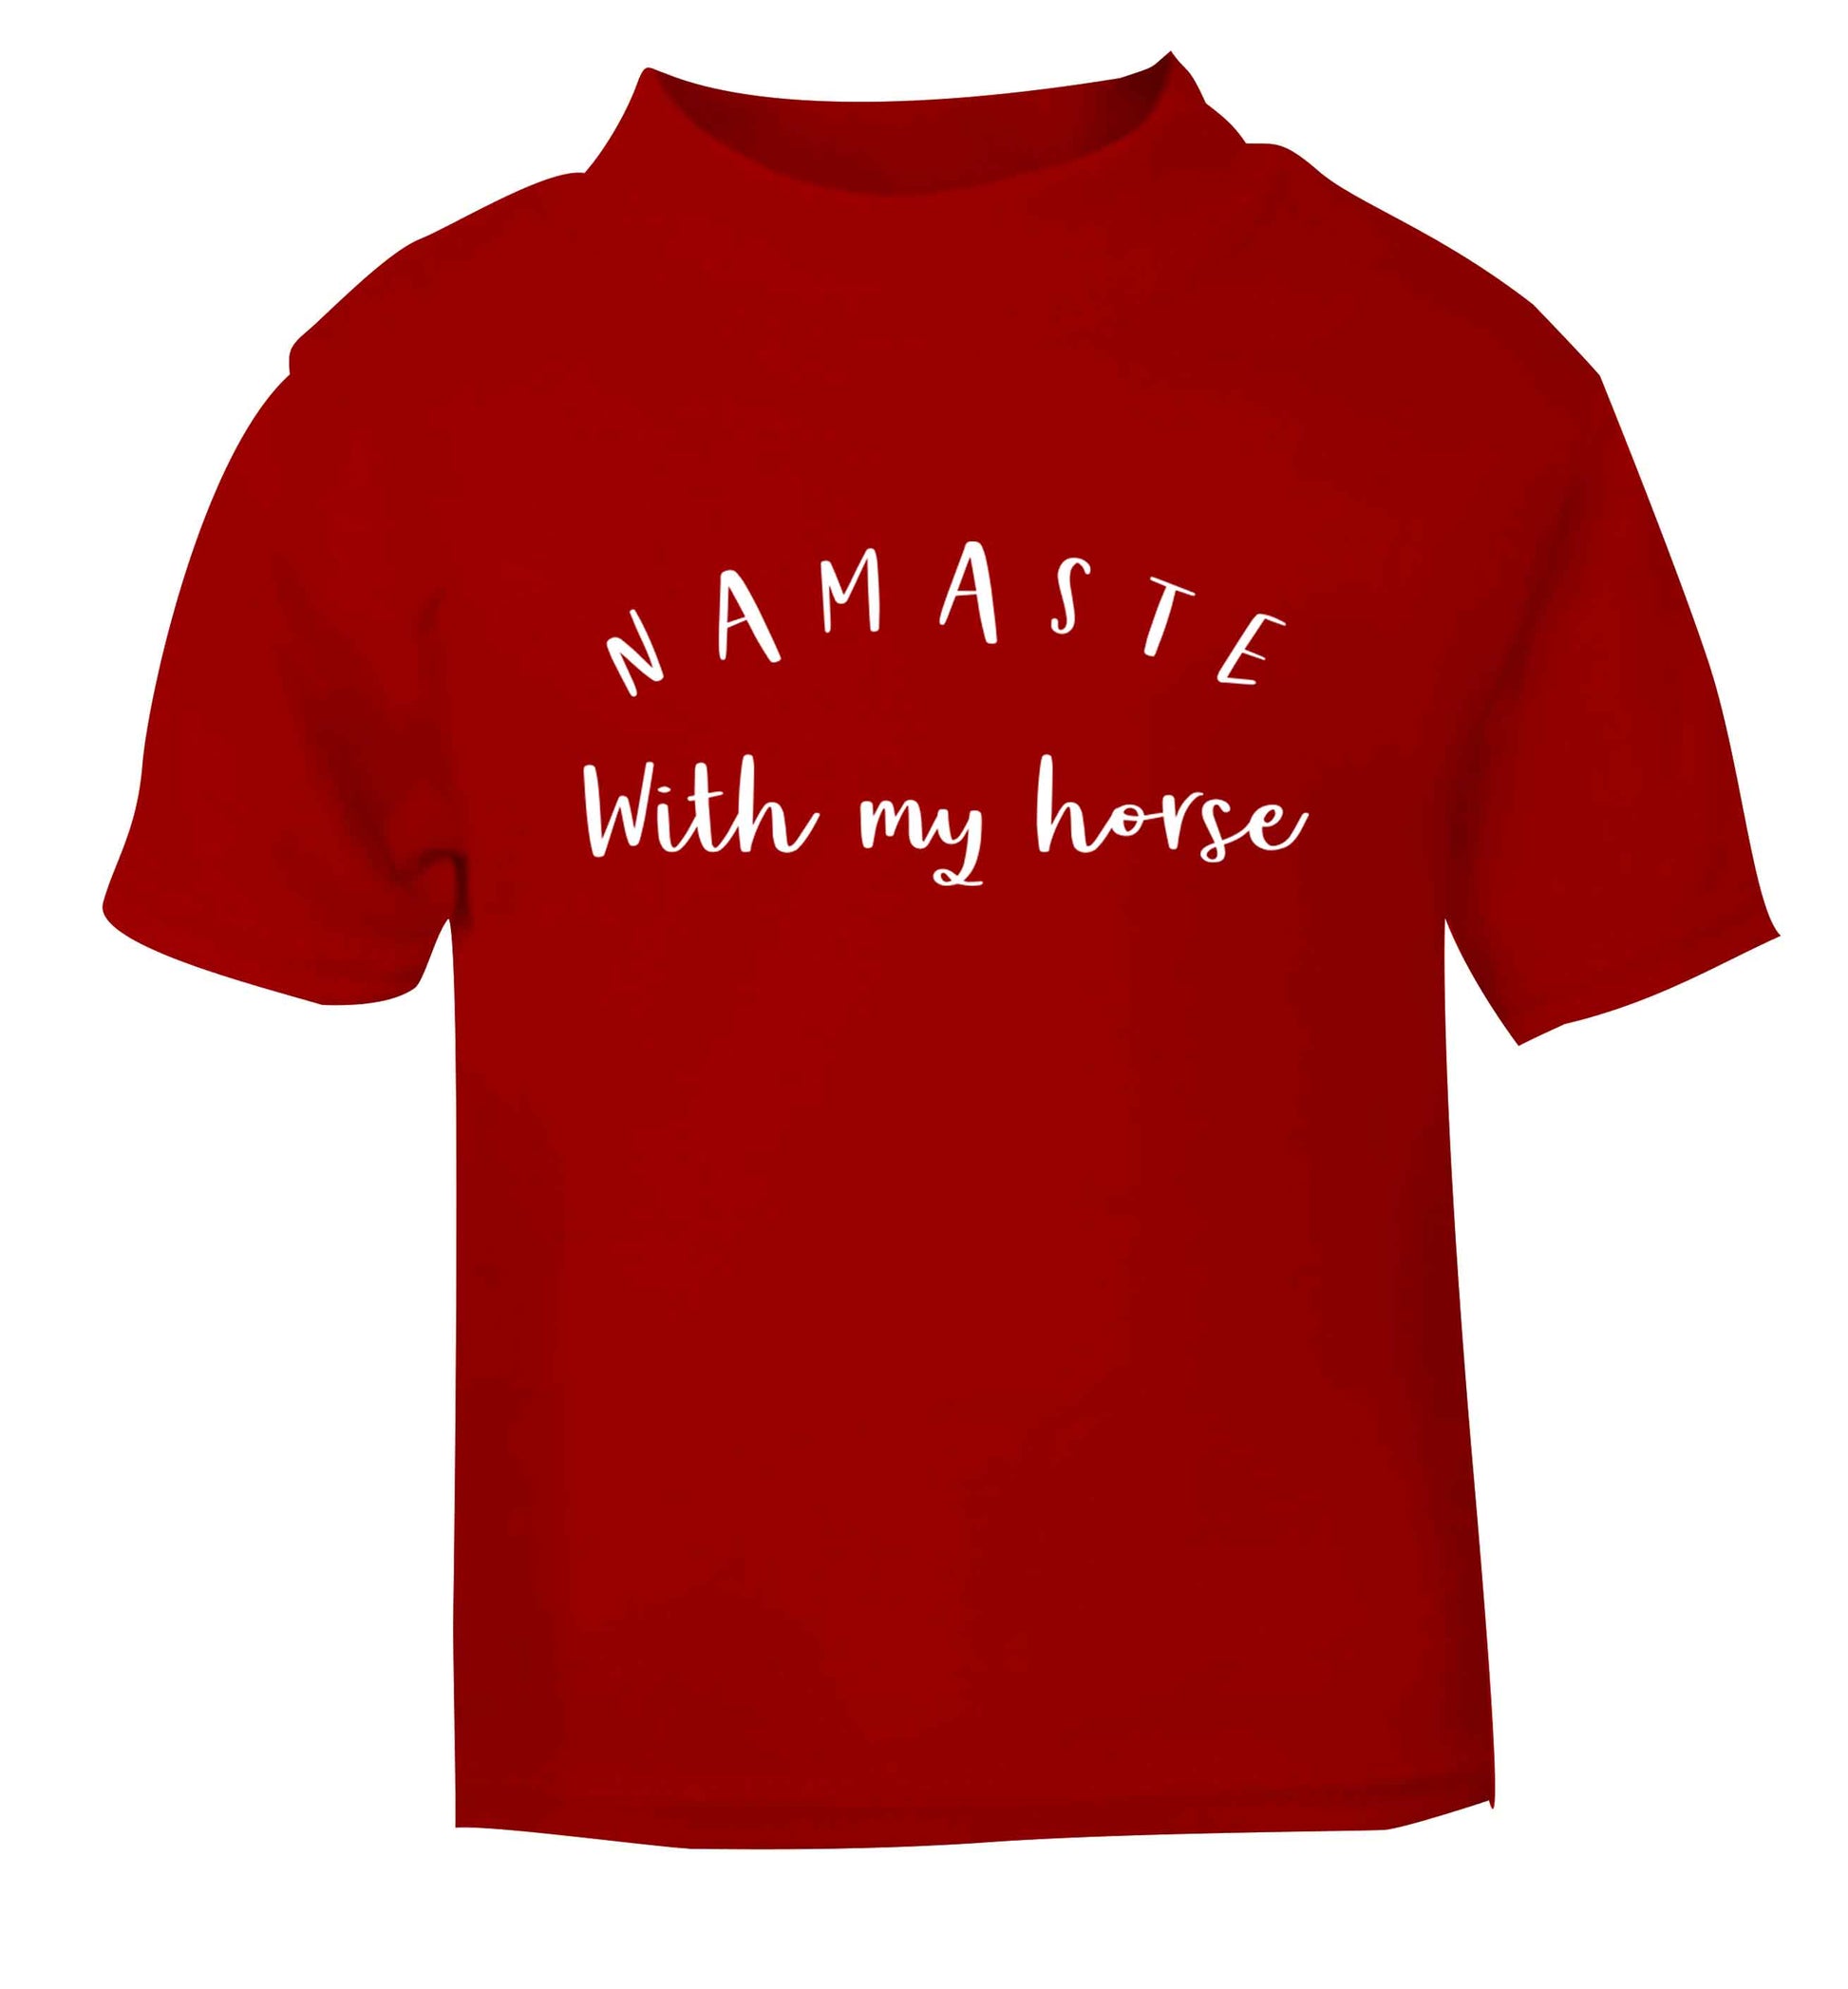 Namaste with my horse red baby toddler Tshirt 2 Years